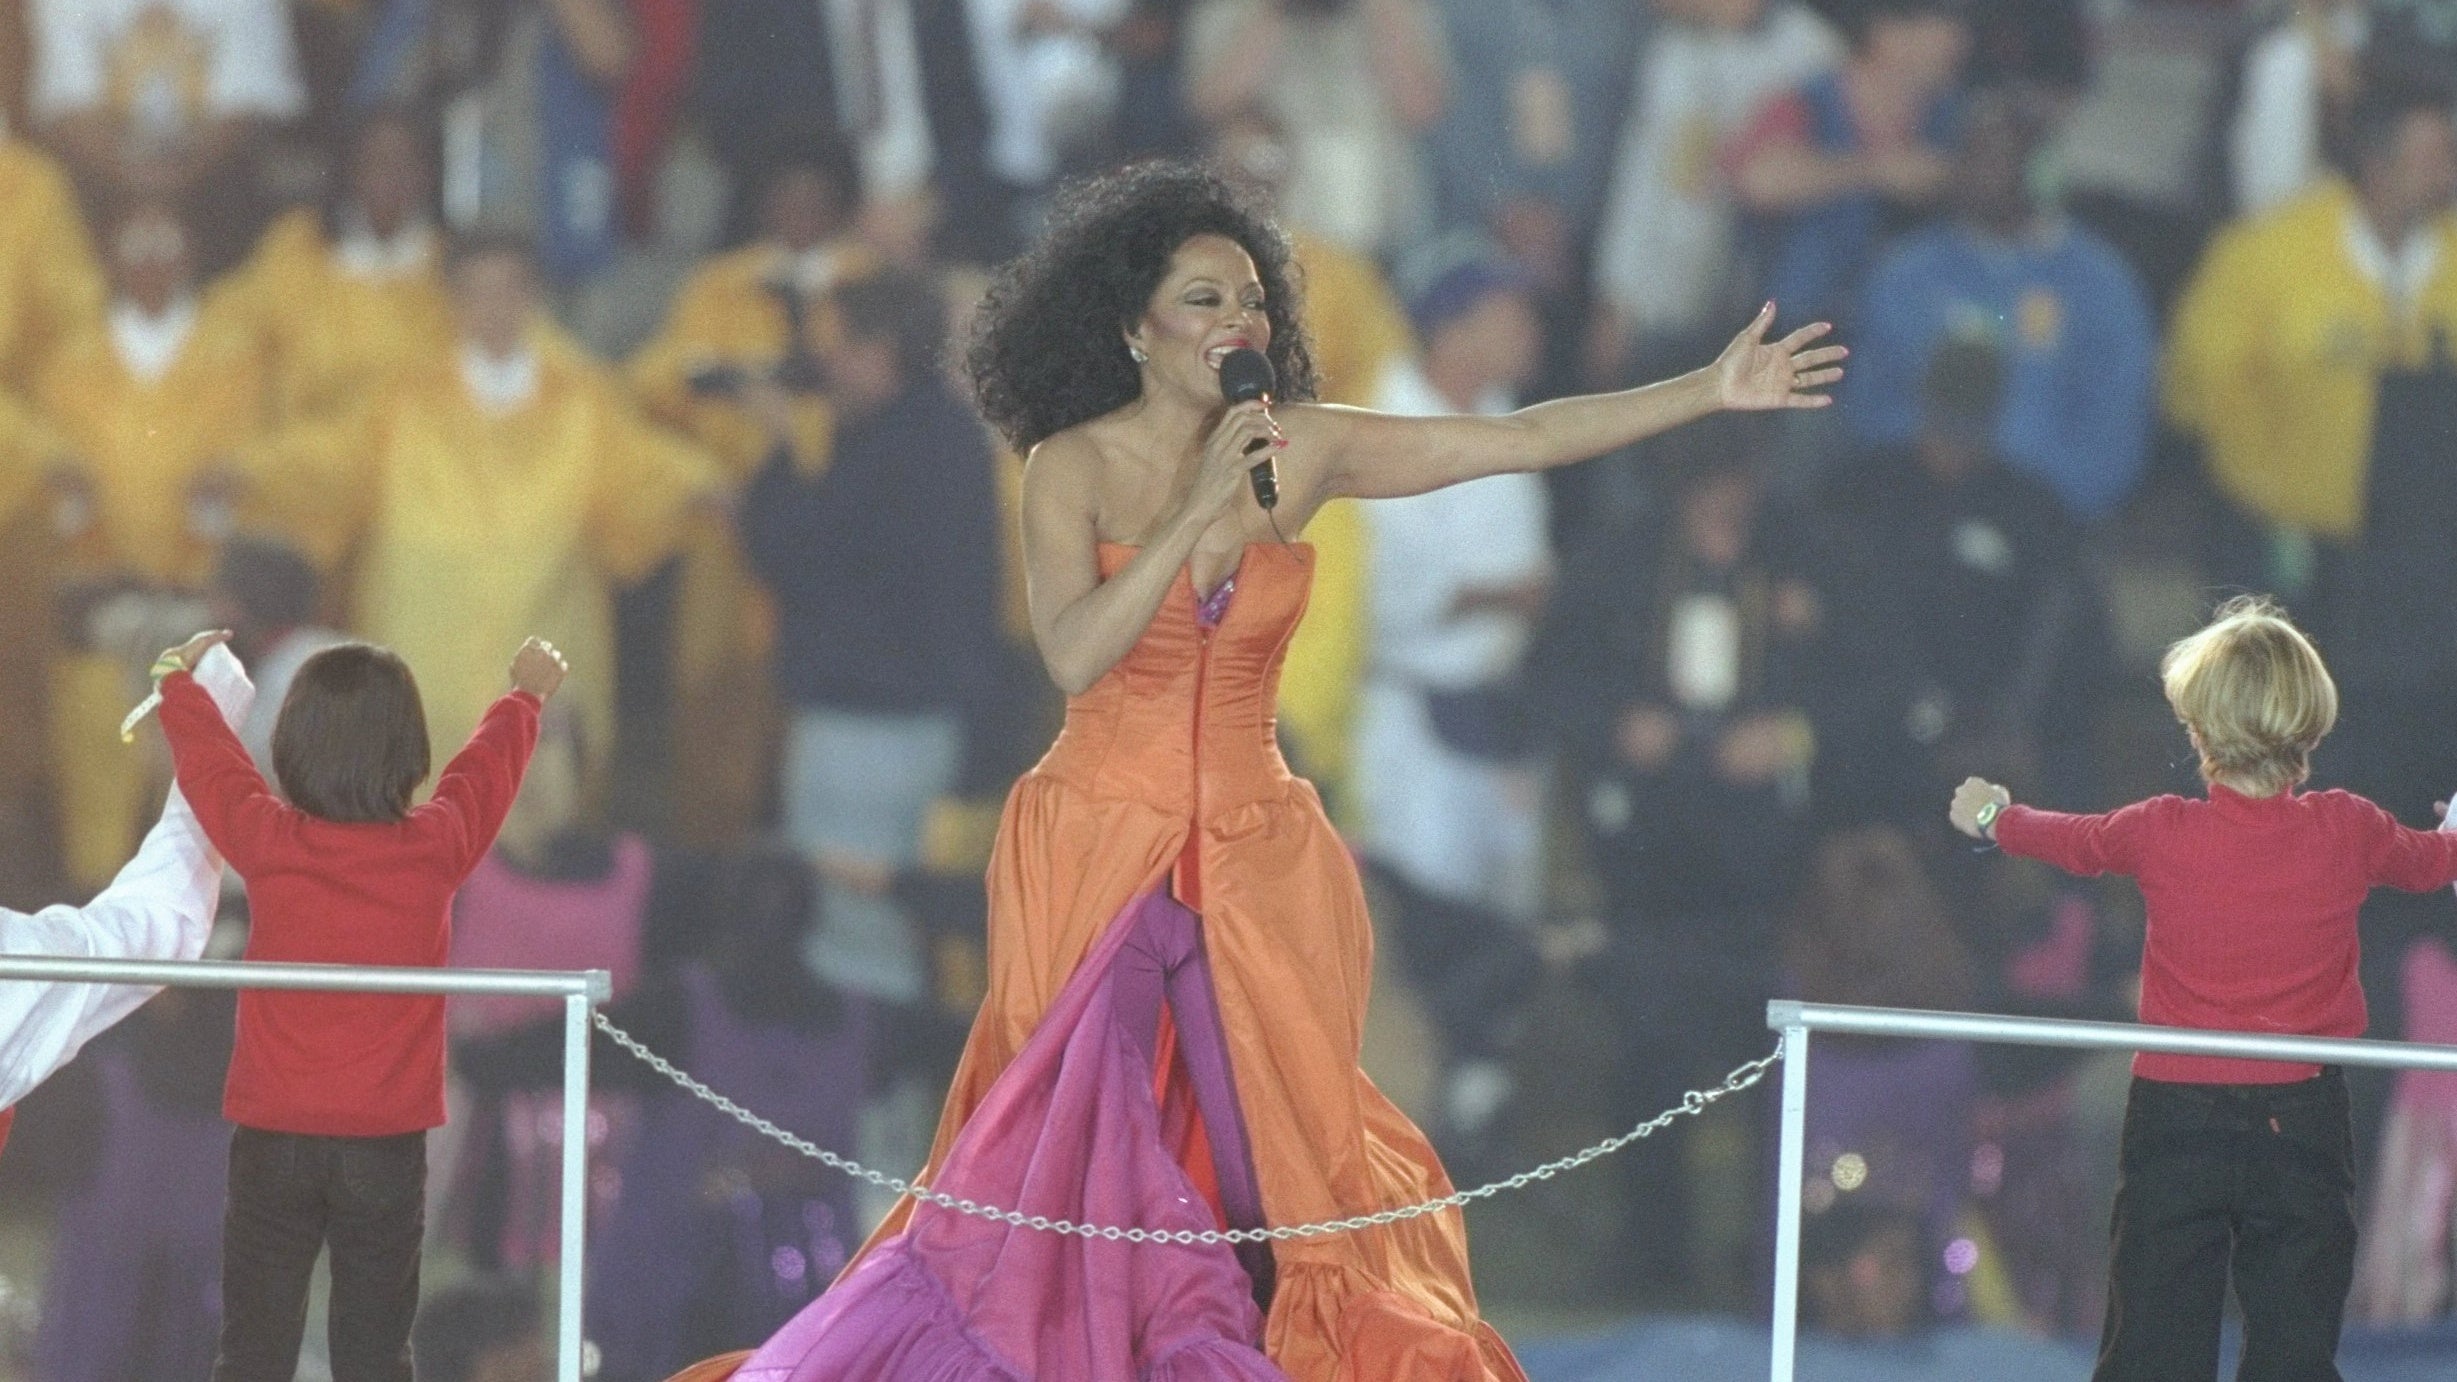 5 Iconic Super Bowl Half-Time Beauty Moments